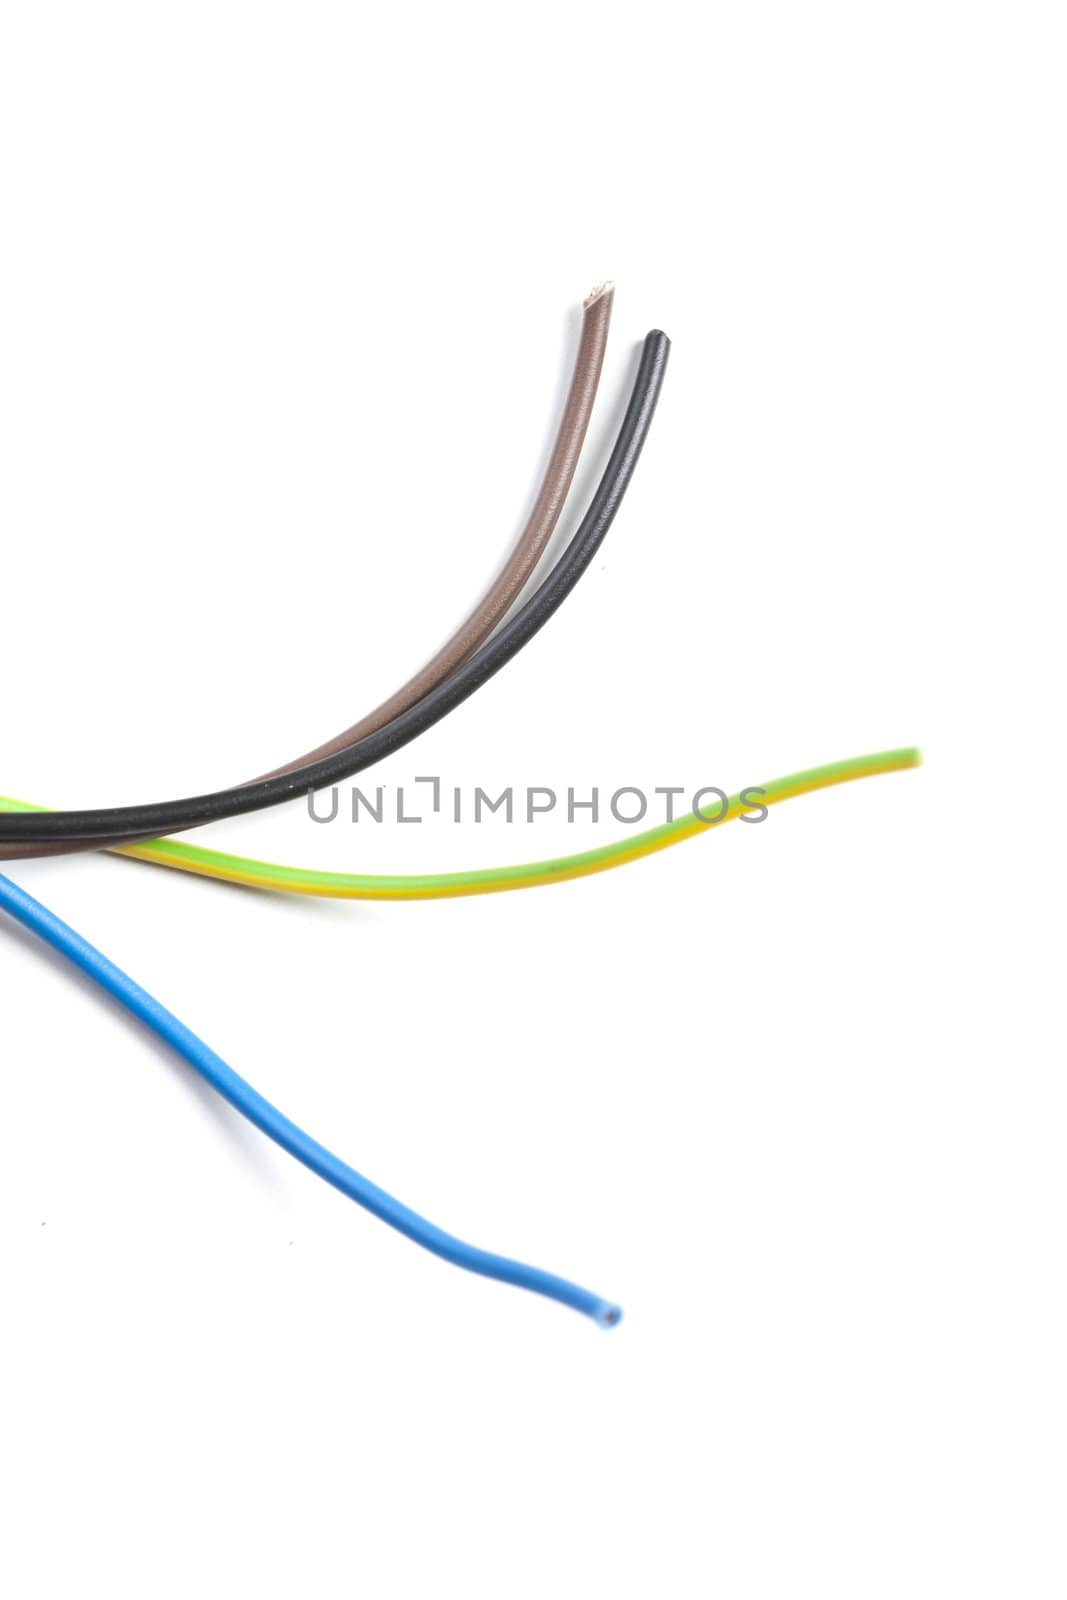 Colorful coils of cables on a white background